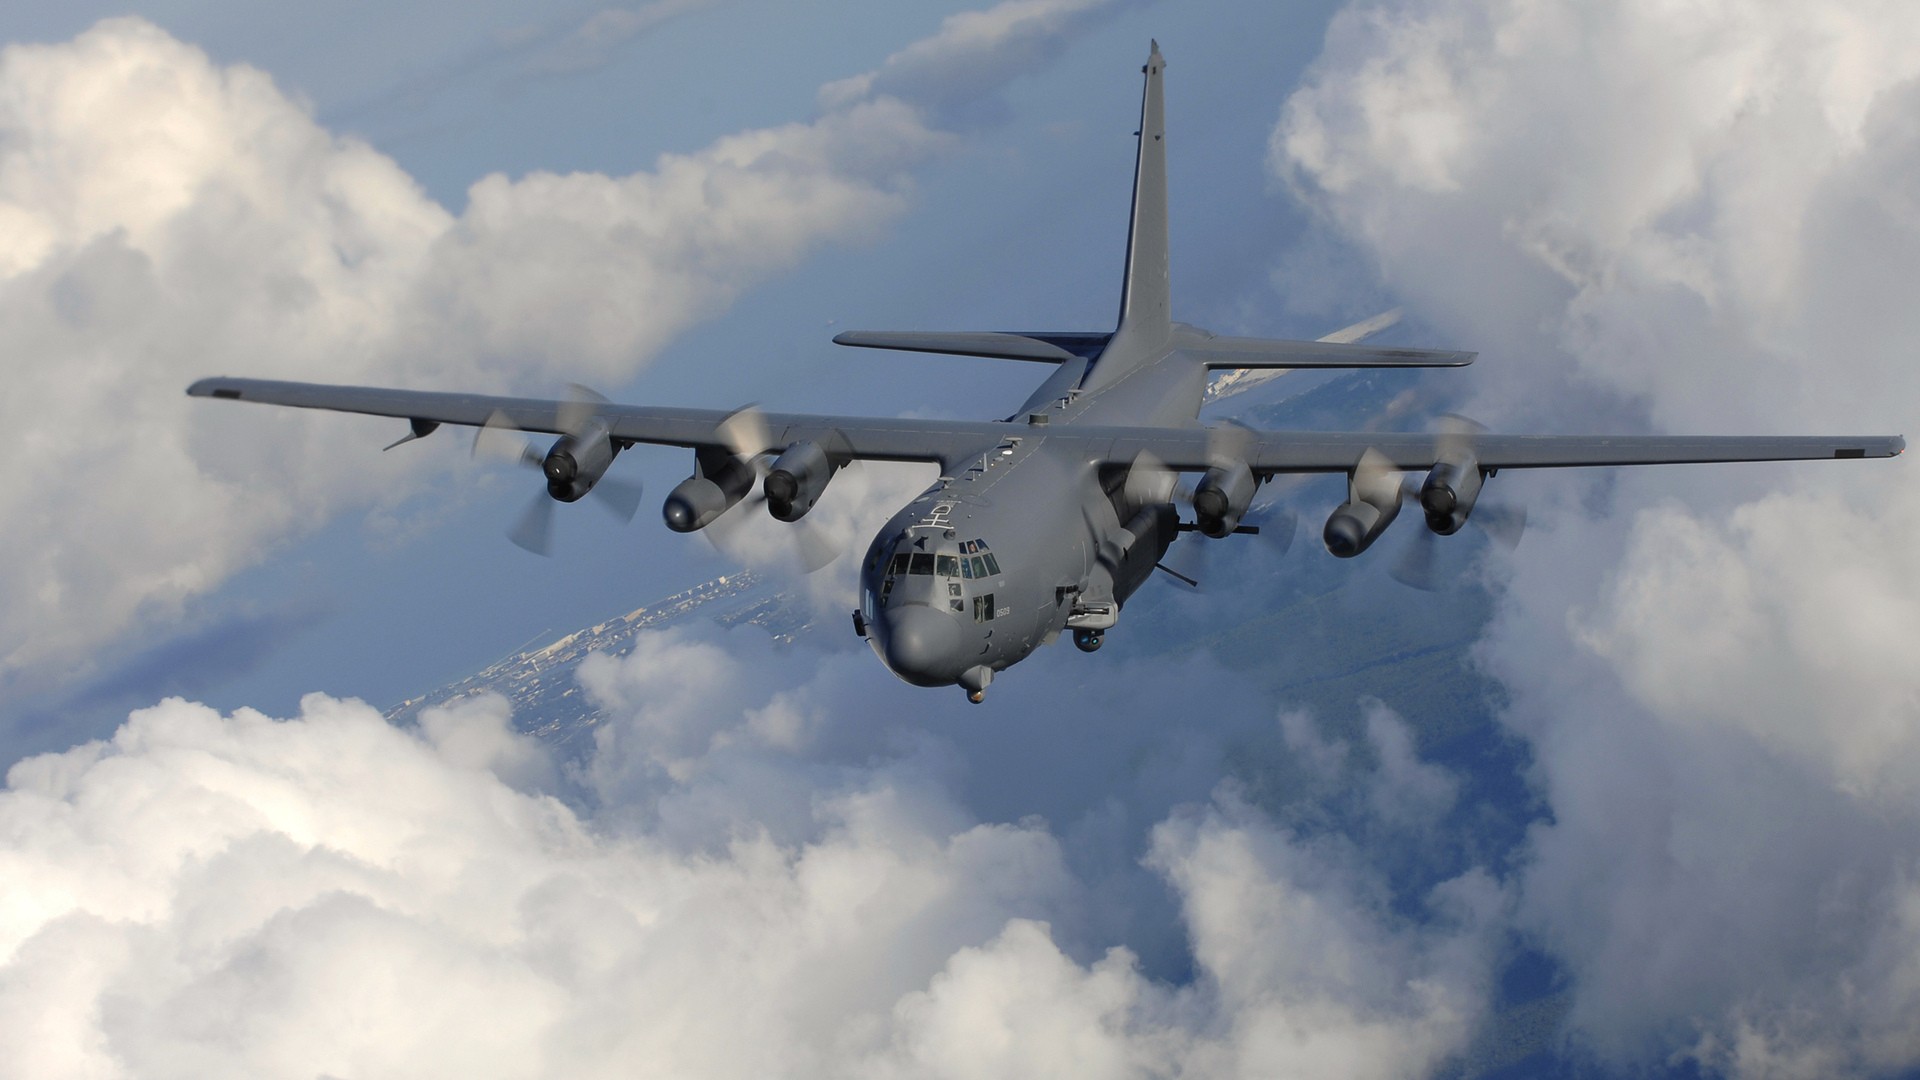 General 1920x1080 aircraft vehicle clouds military aircraft military military vehicle Lockheed AC-130 American aircraft